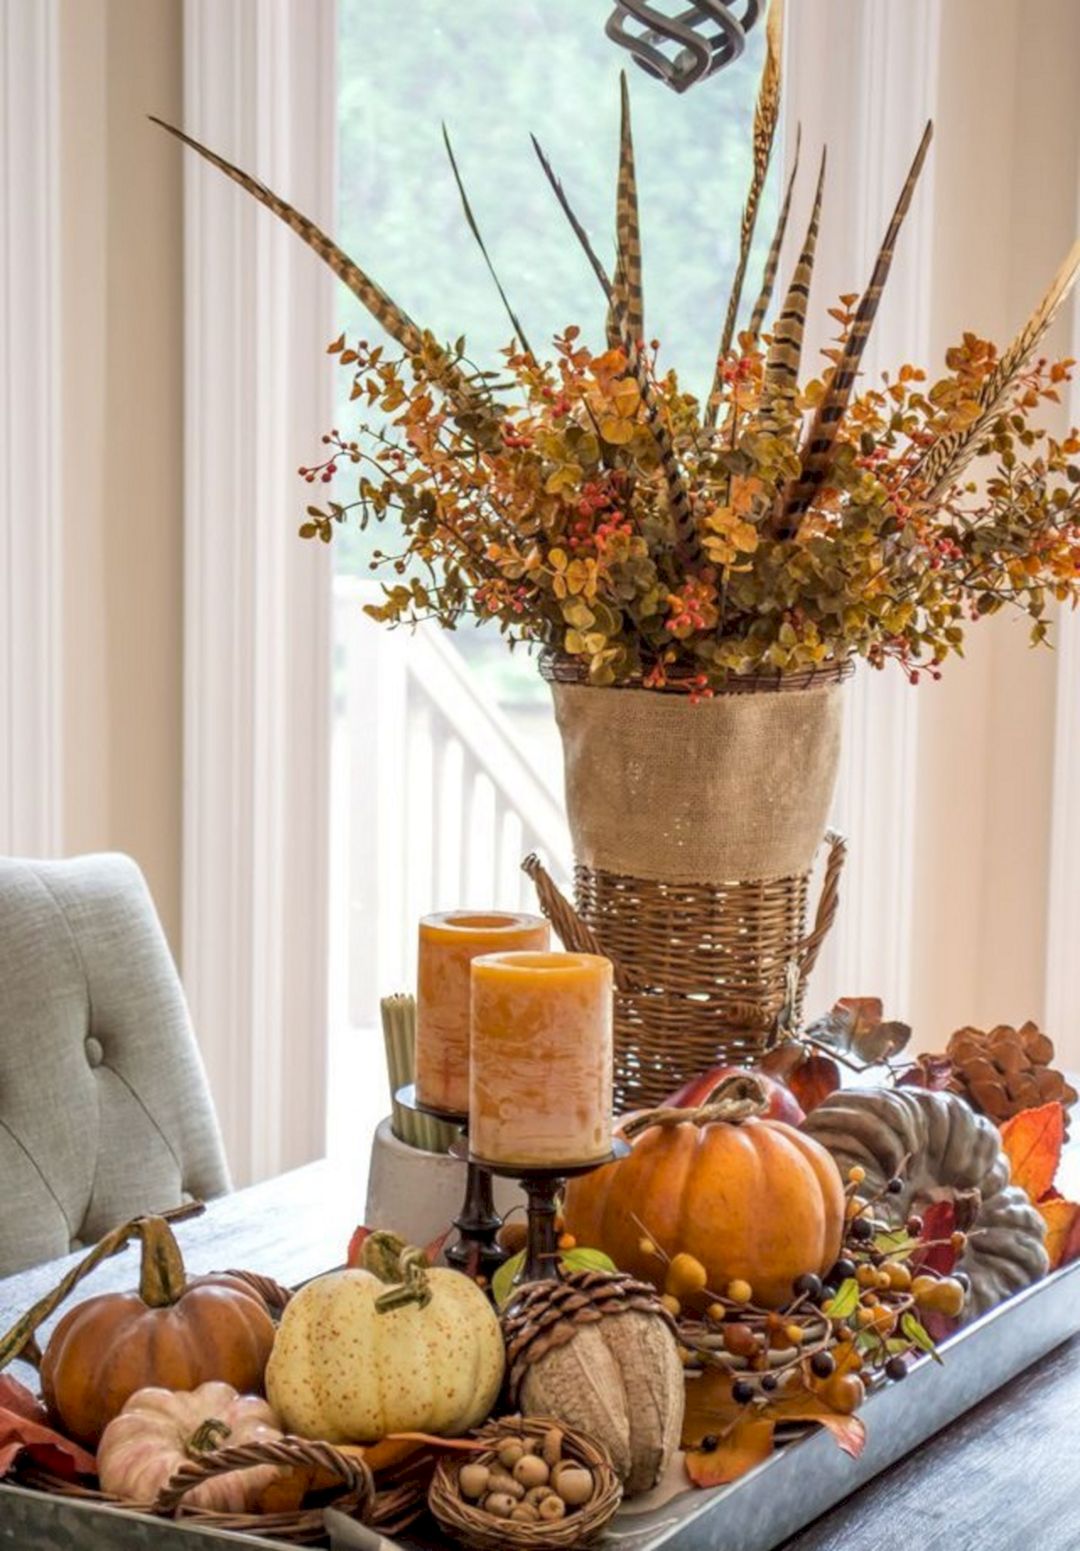 Farmhouse Centerpiece from Countryliving